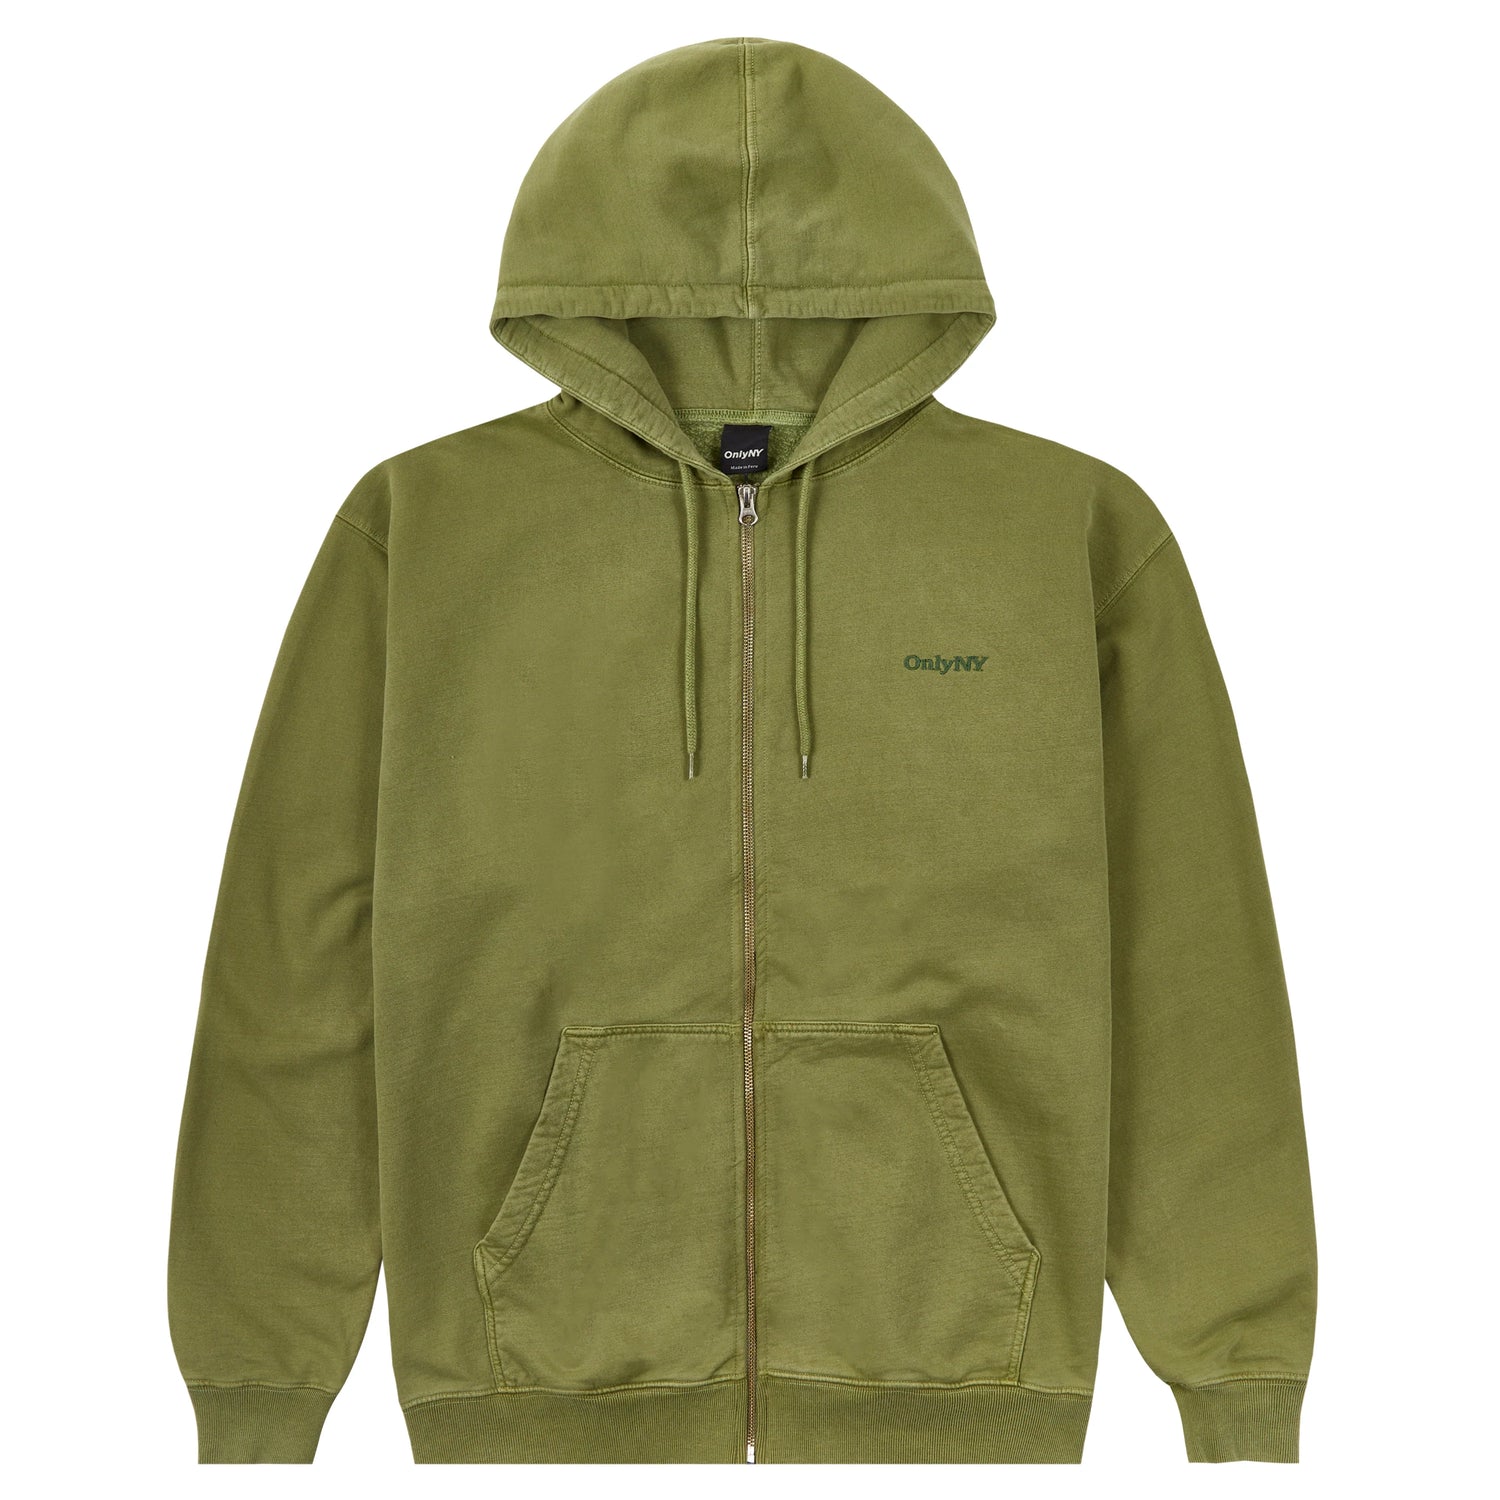 Only NY New York Grown Harvest Zip Hoodie - Moss Green